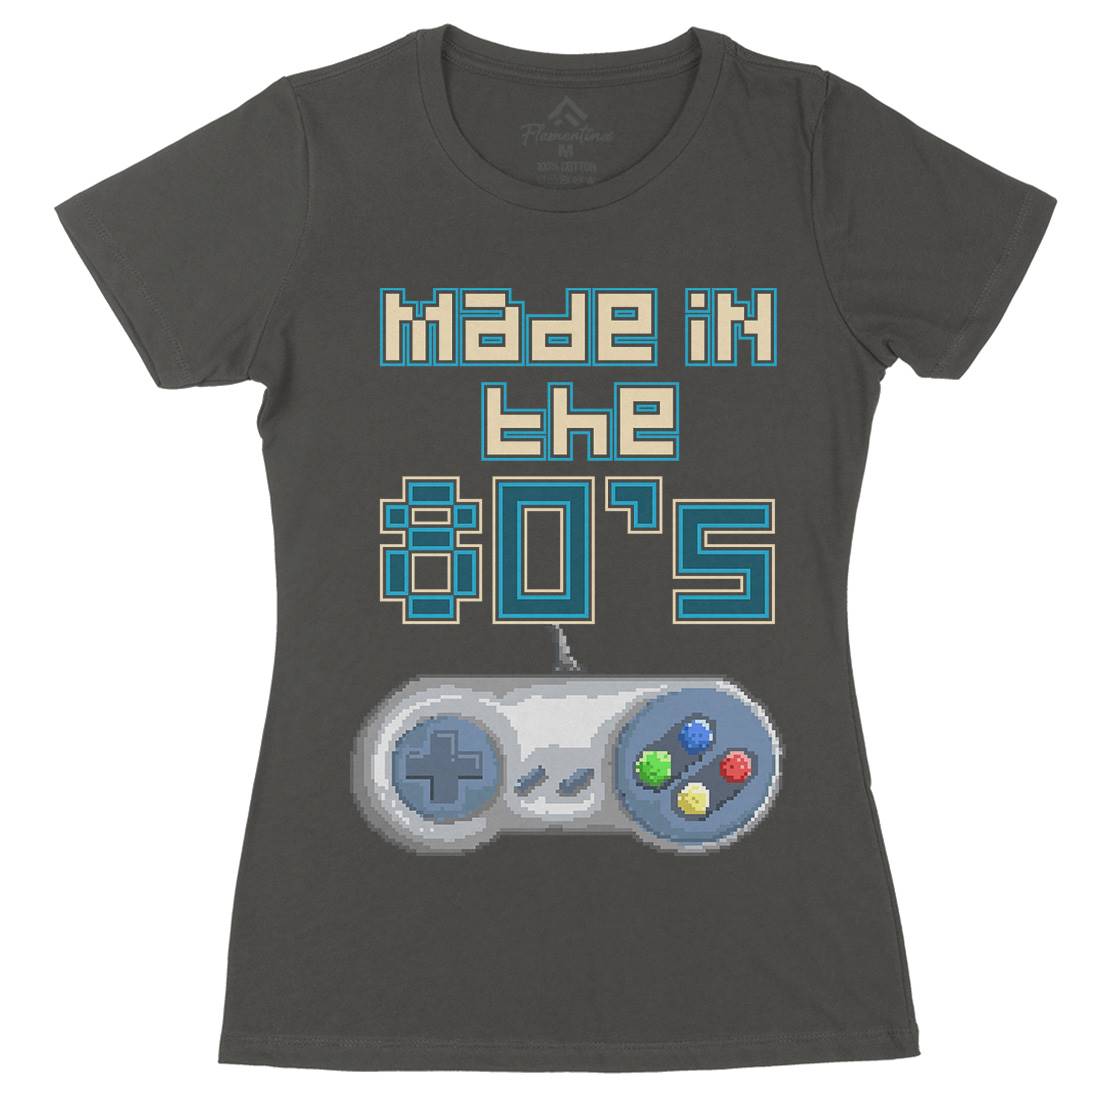 Made In Thes Womens Organic Crew Neck T-Shirt Geek B929